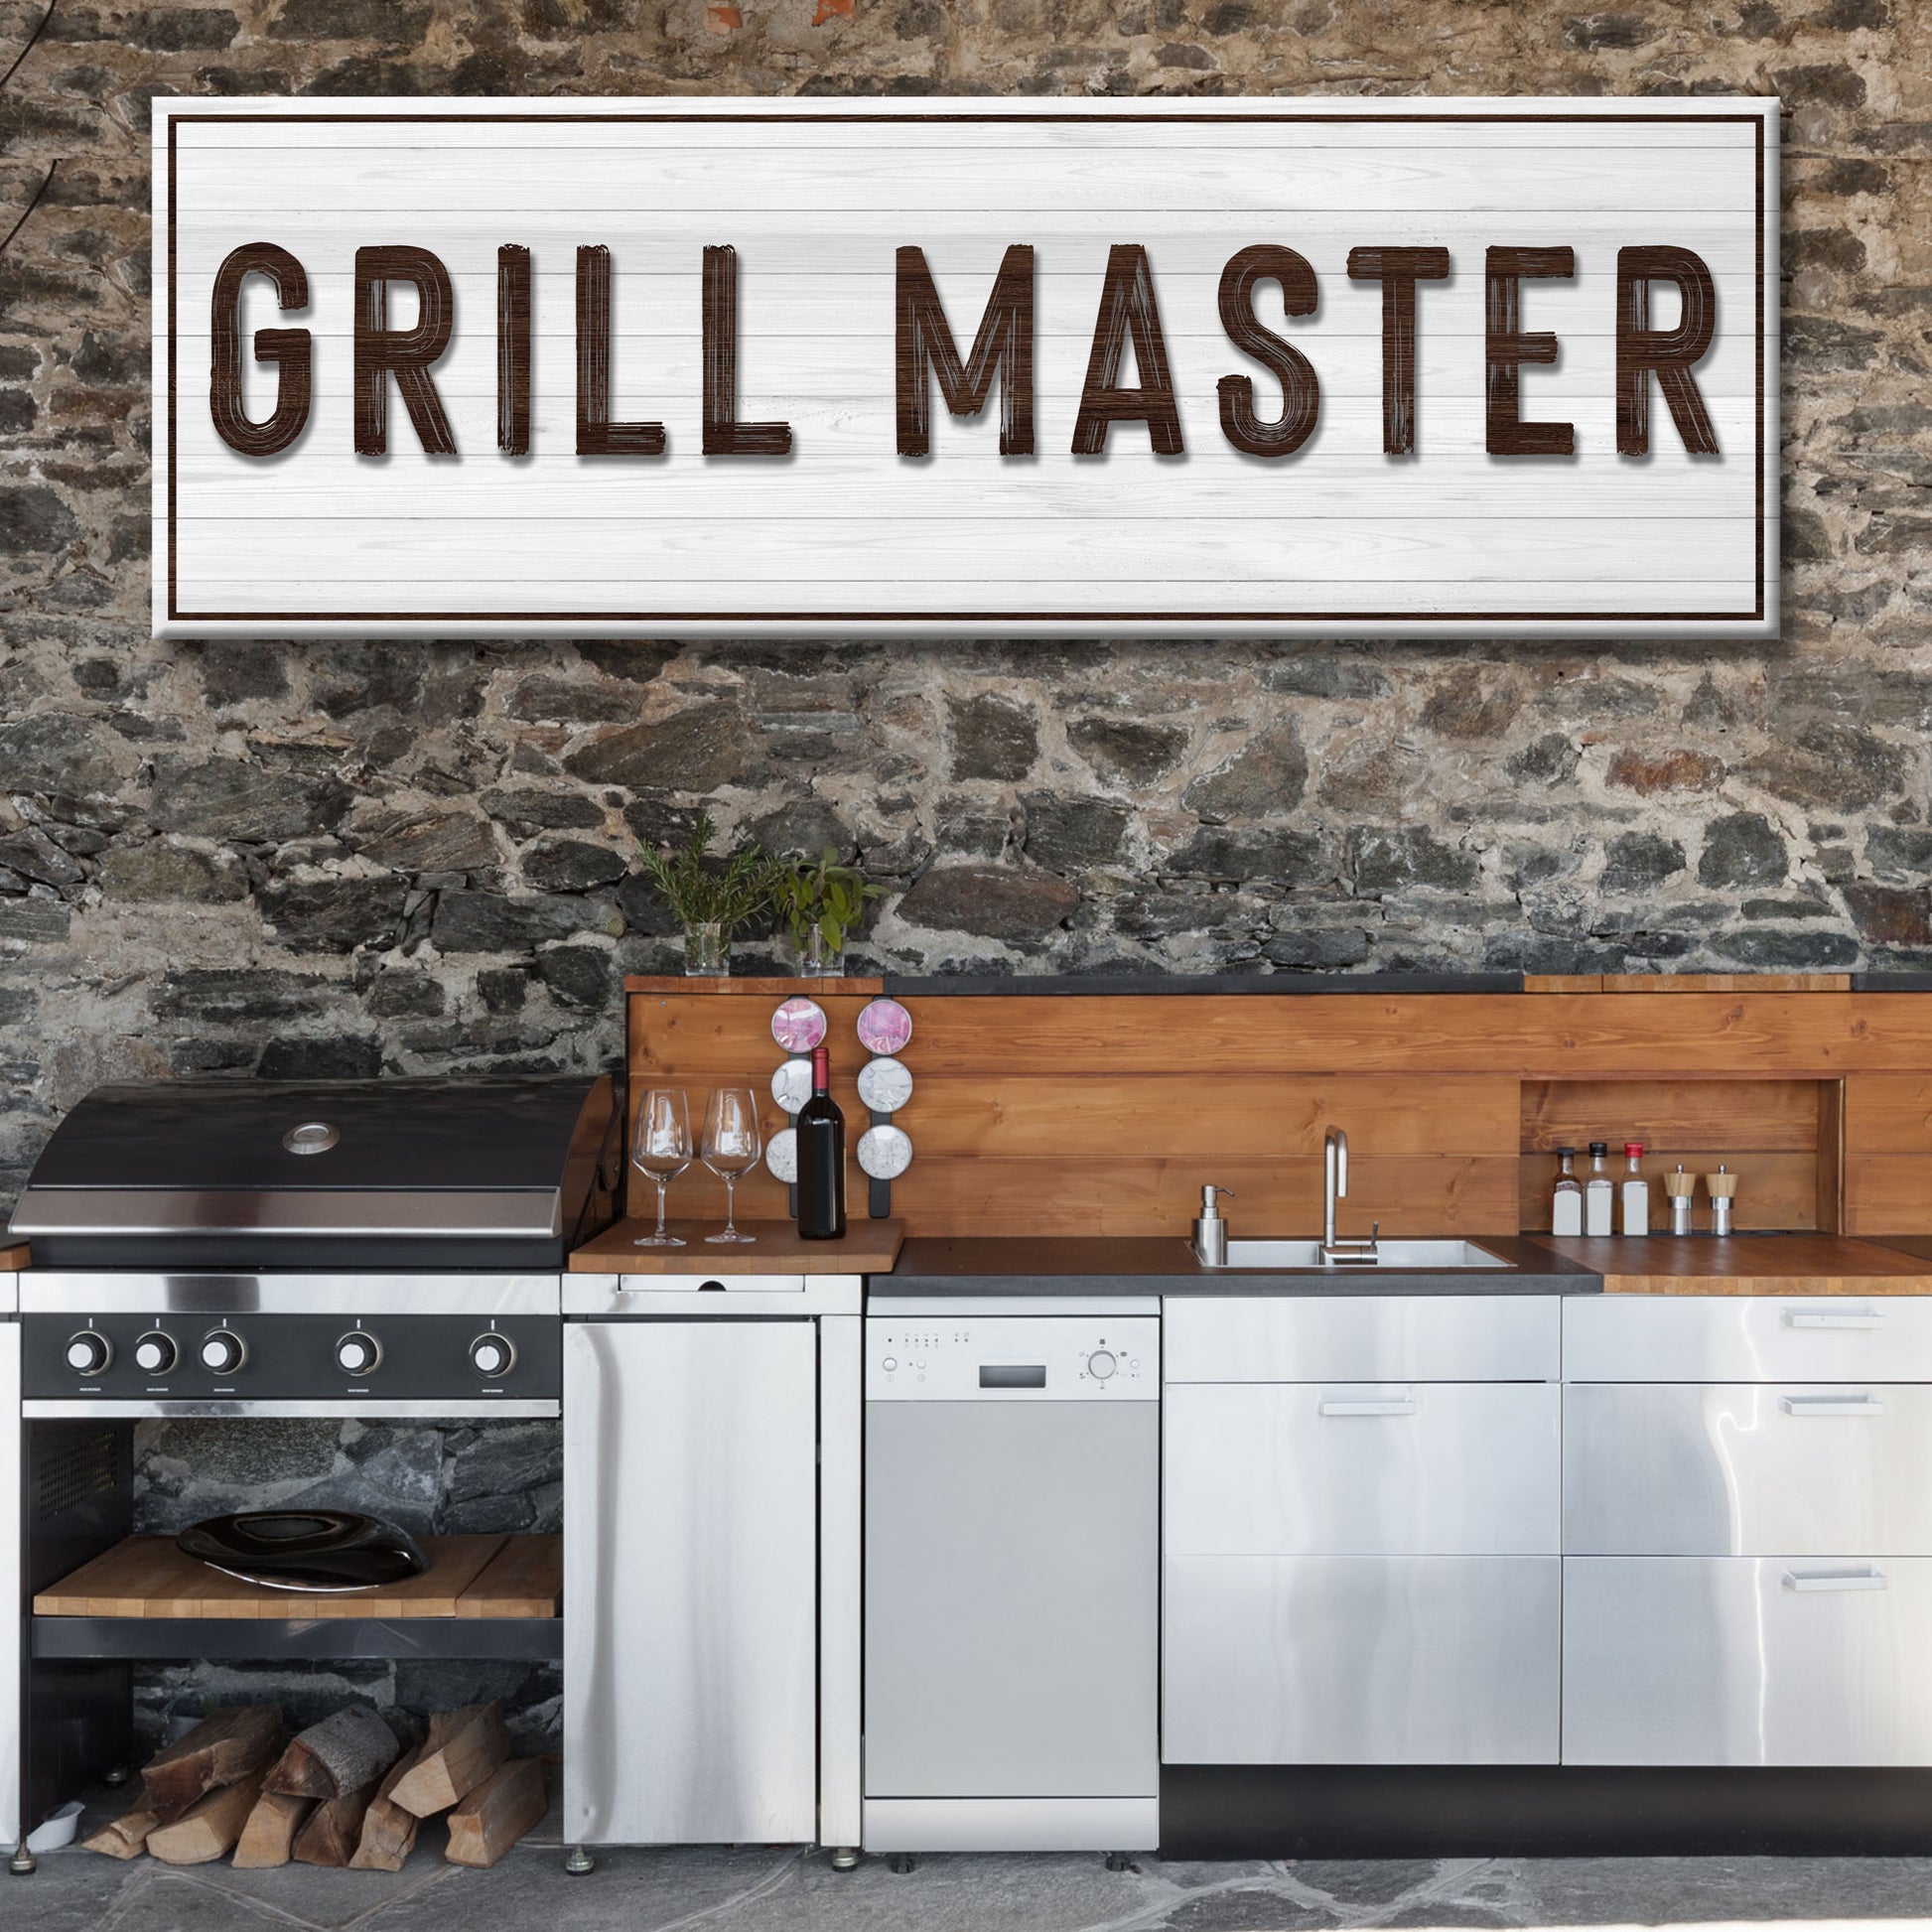 Grill Master Sign - Image by Tailored Canvases